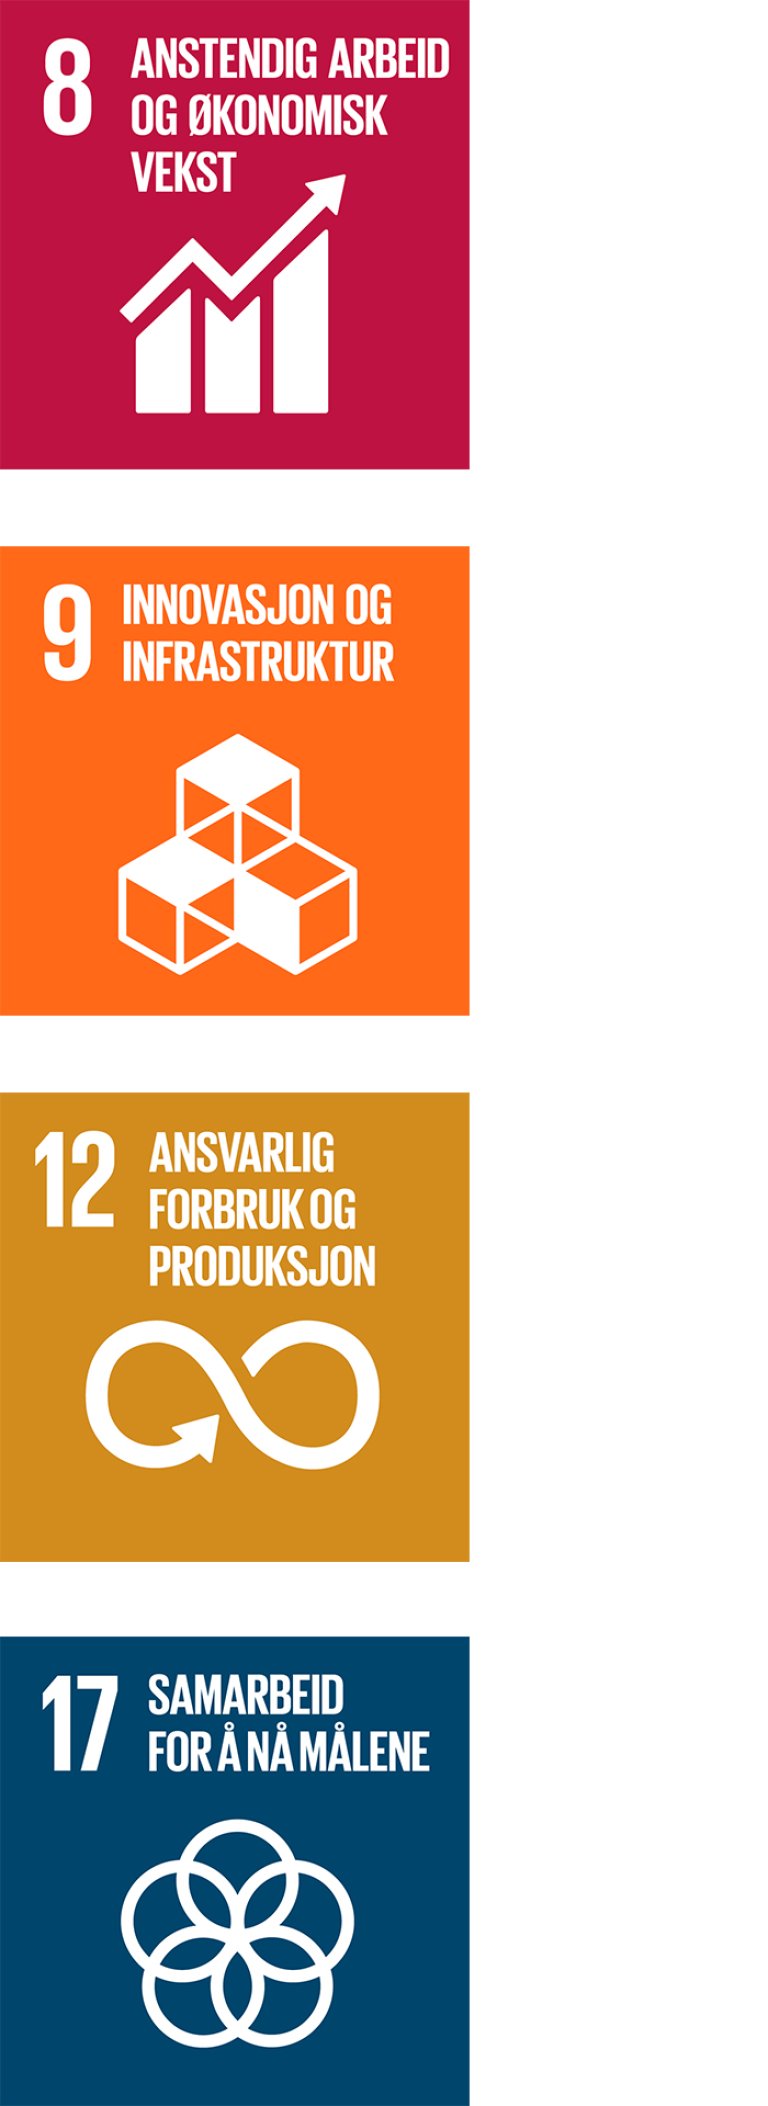 Illustration featuring four of the UN Sustainable Development Goals.